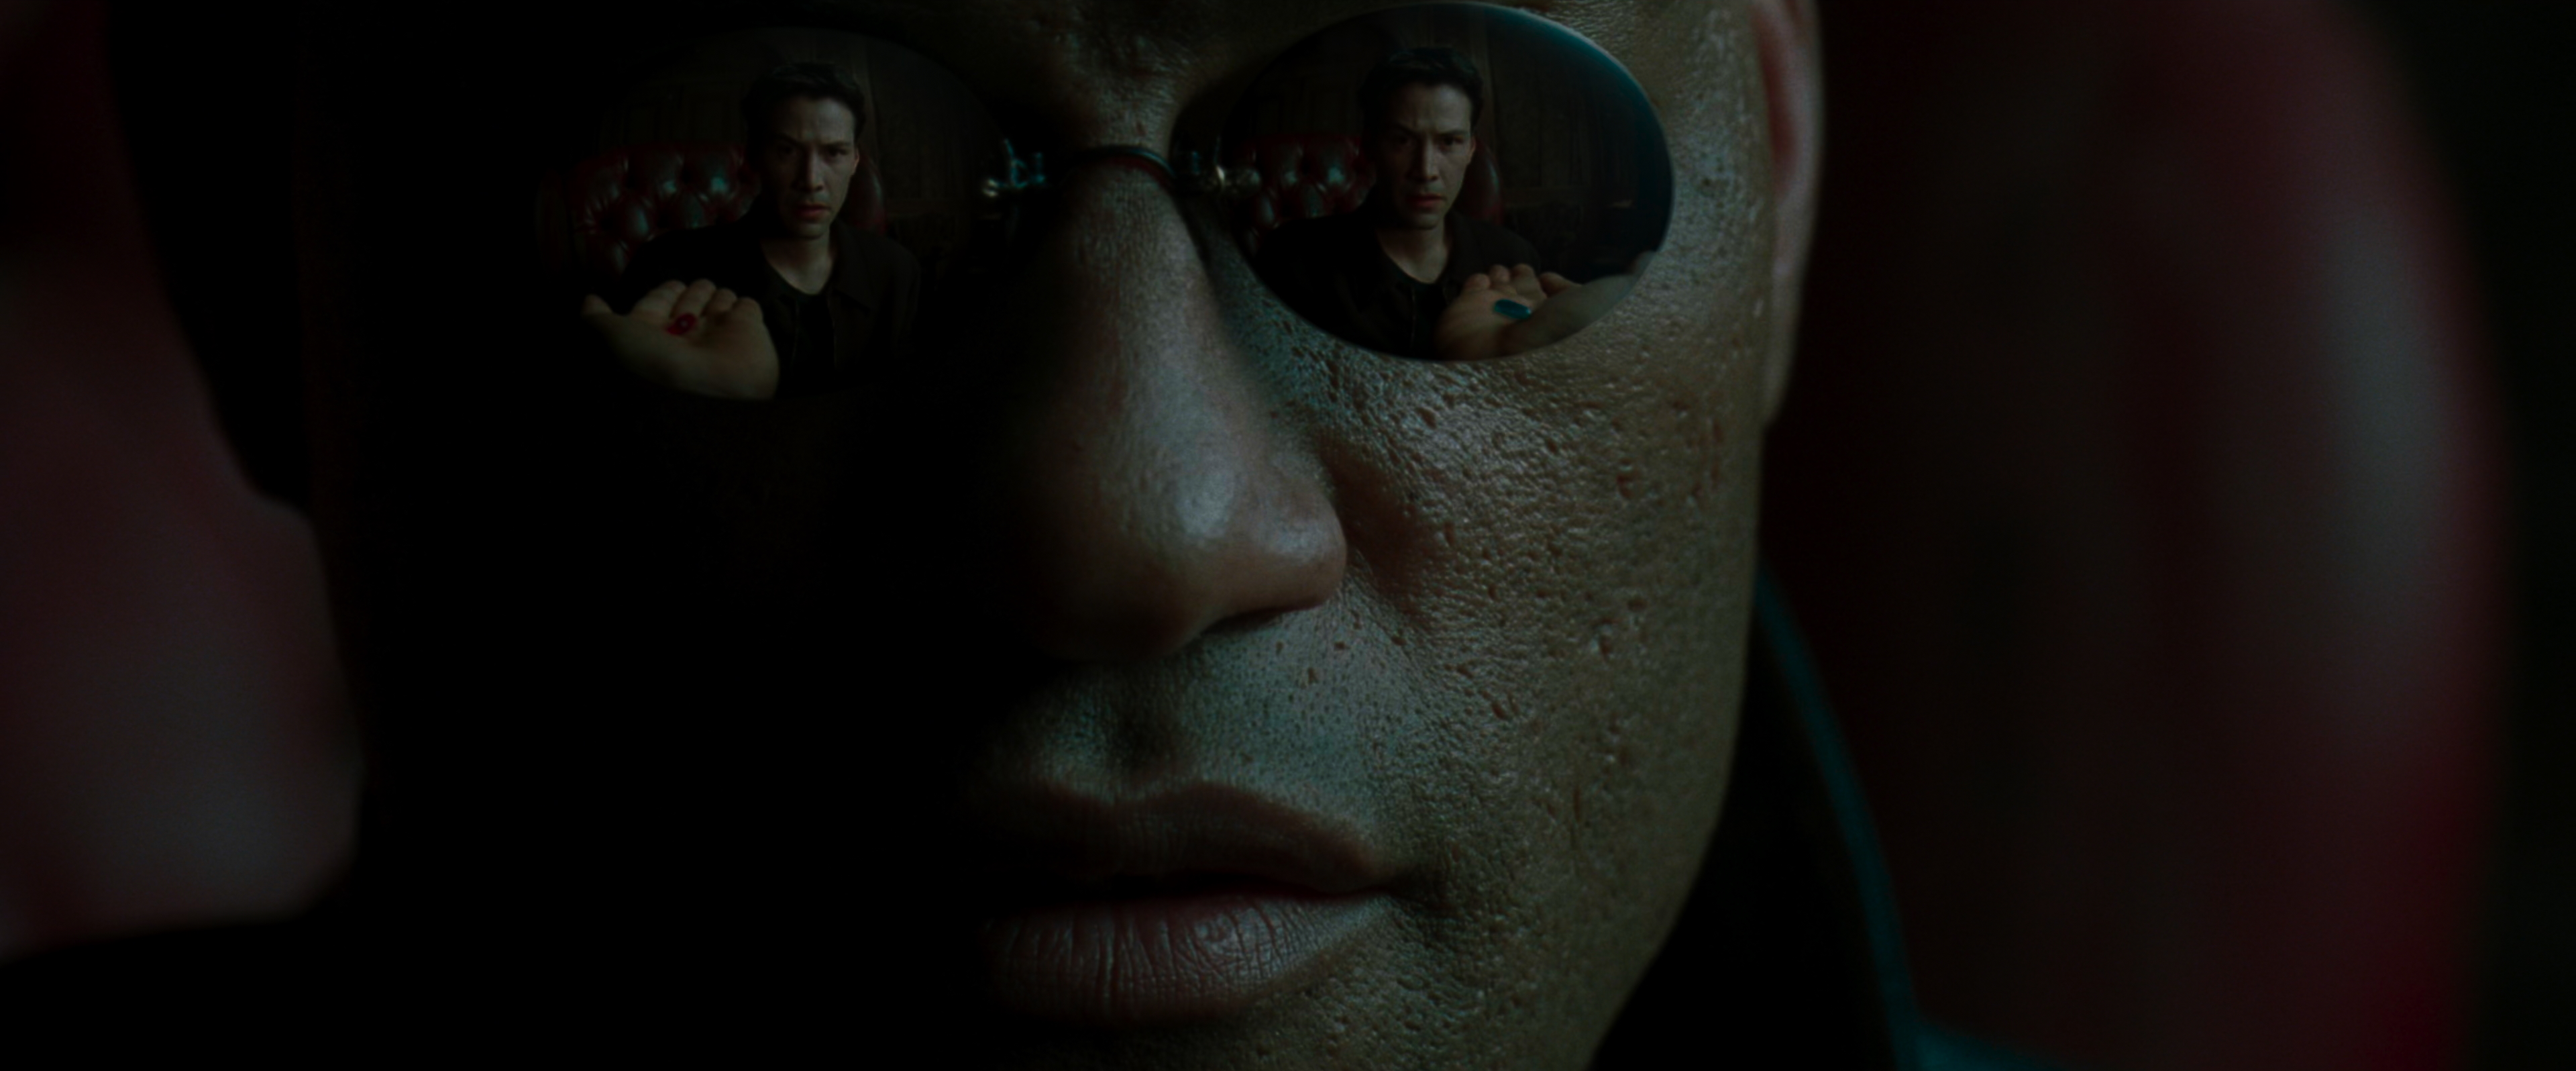 http://img2.wikia.nocookie.net/__cb20060715194257/matrix/images/c/c1/Red_and_blue_pills.JPG